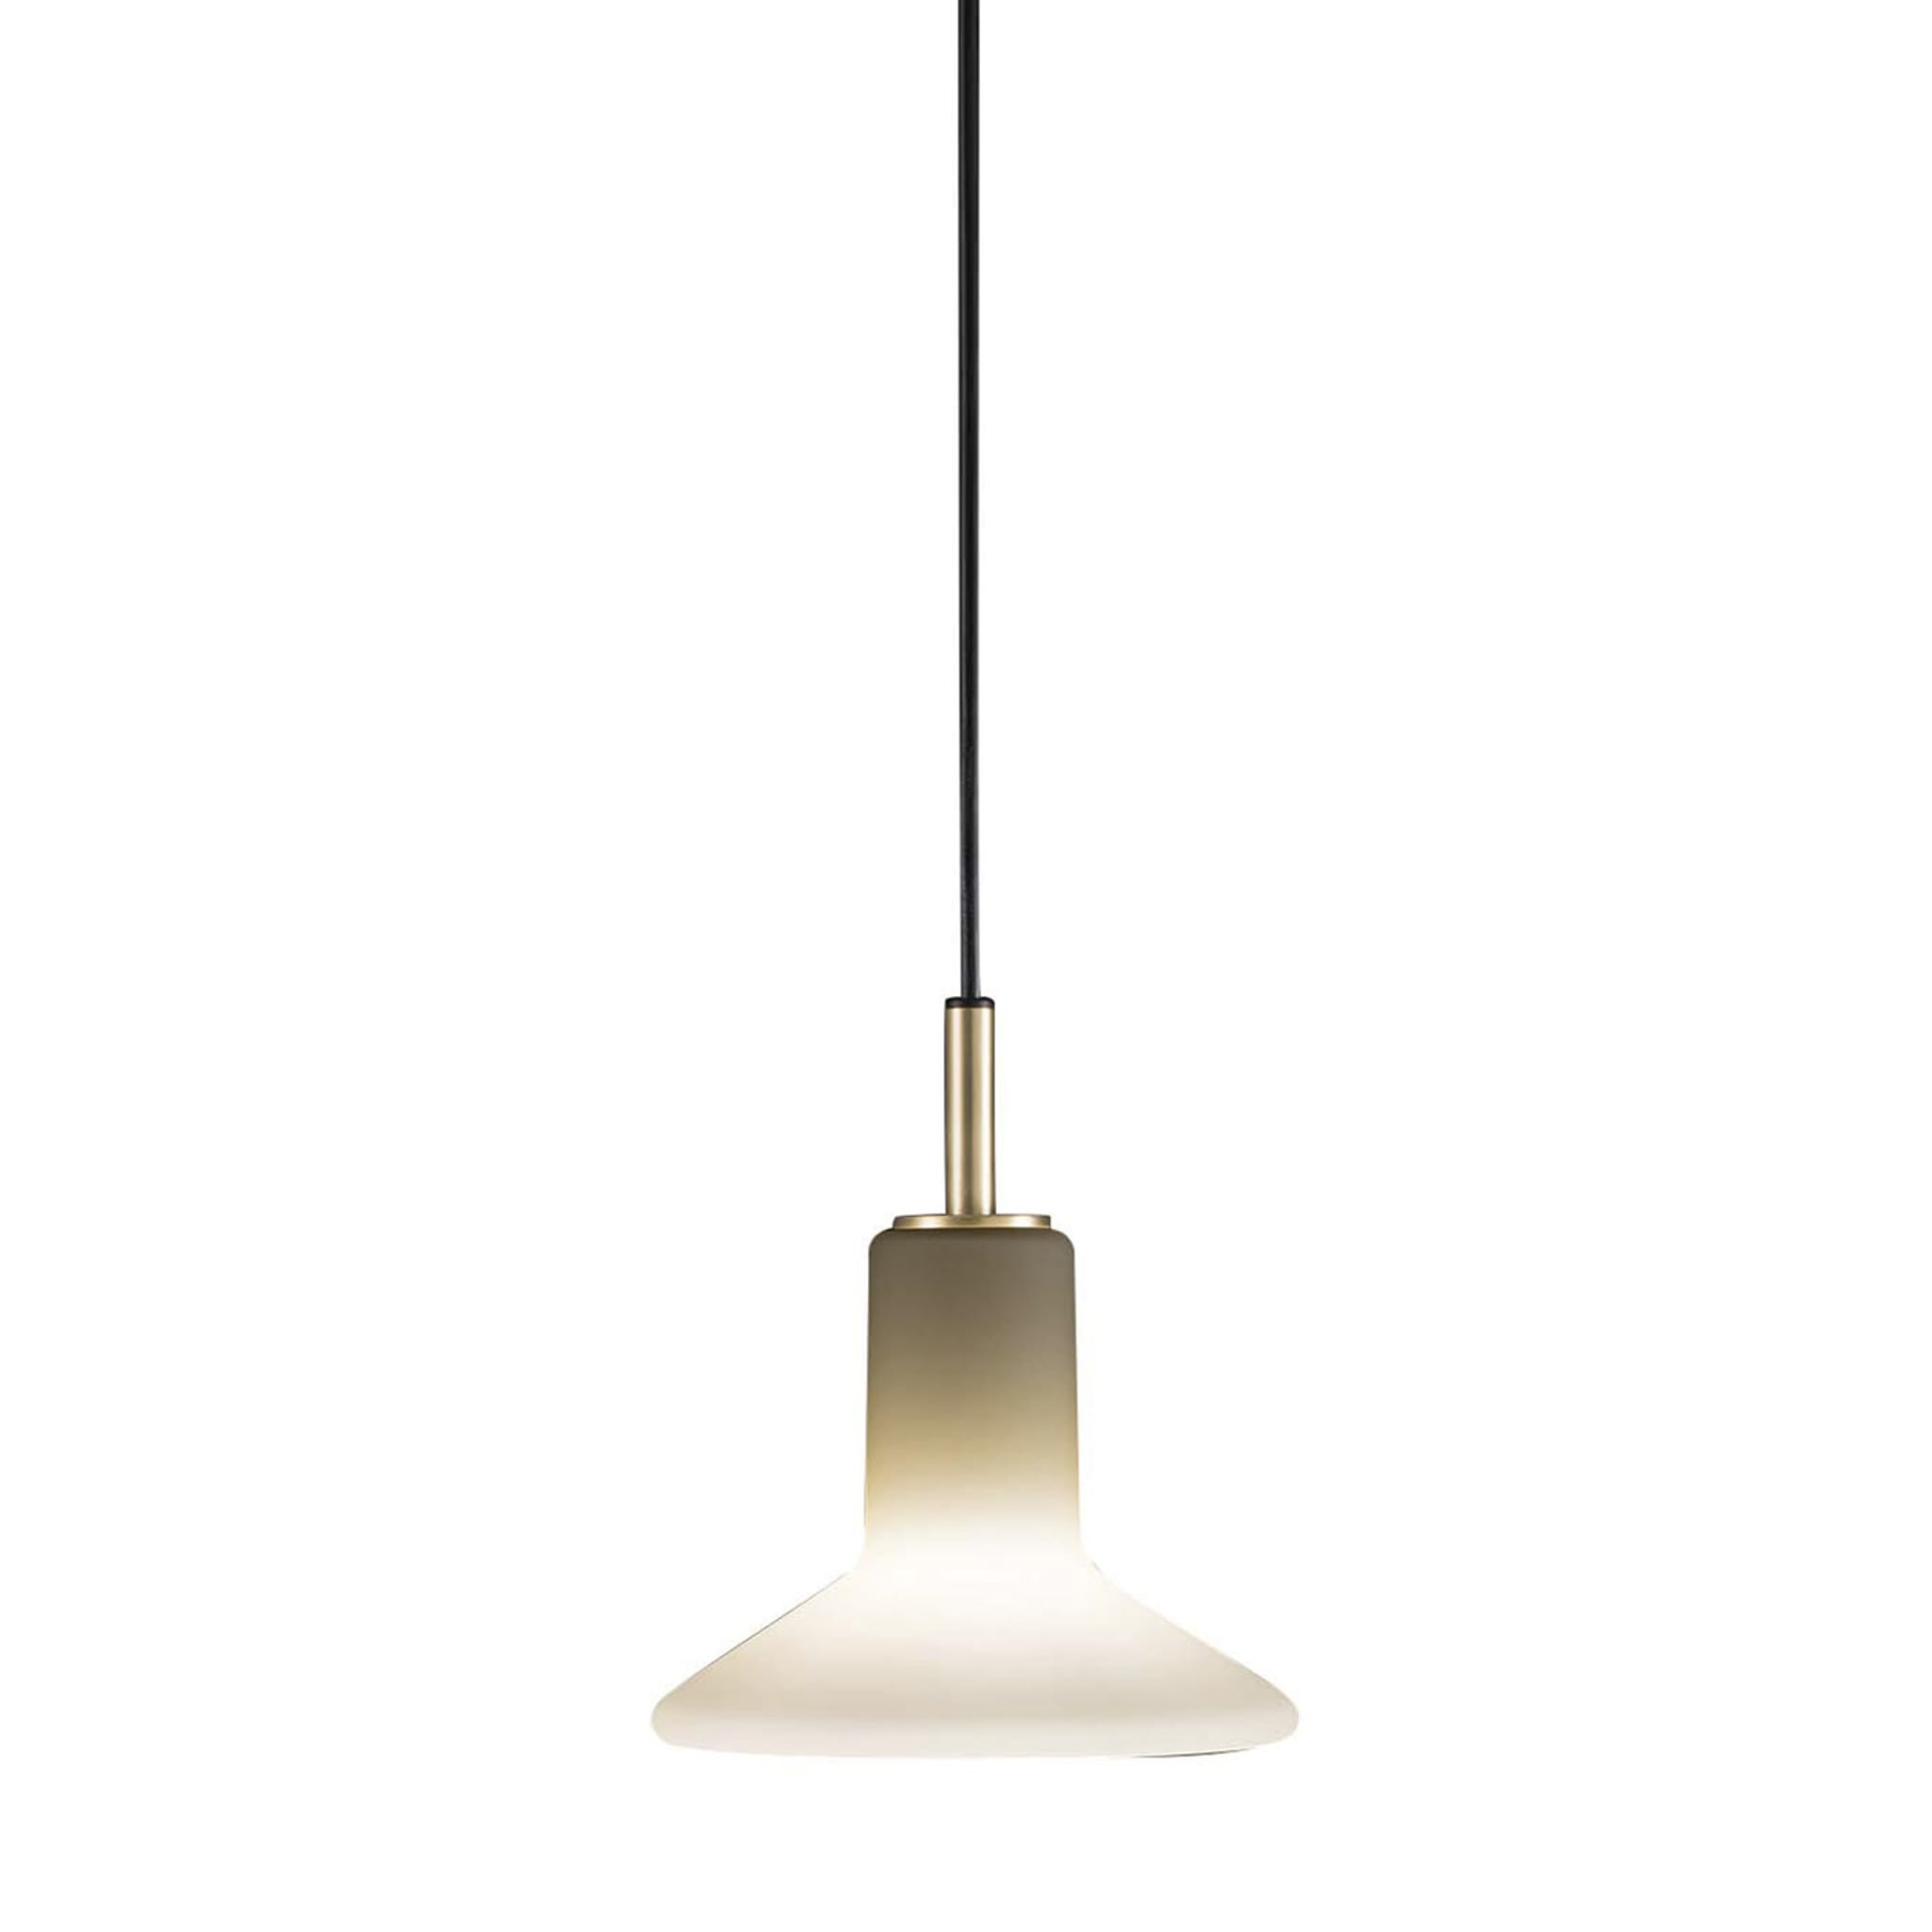 Olly Pendant by Lorenza Bozzoli in Brass - Main view